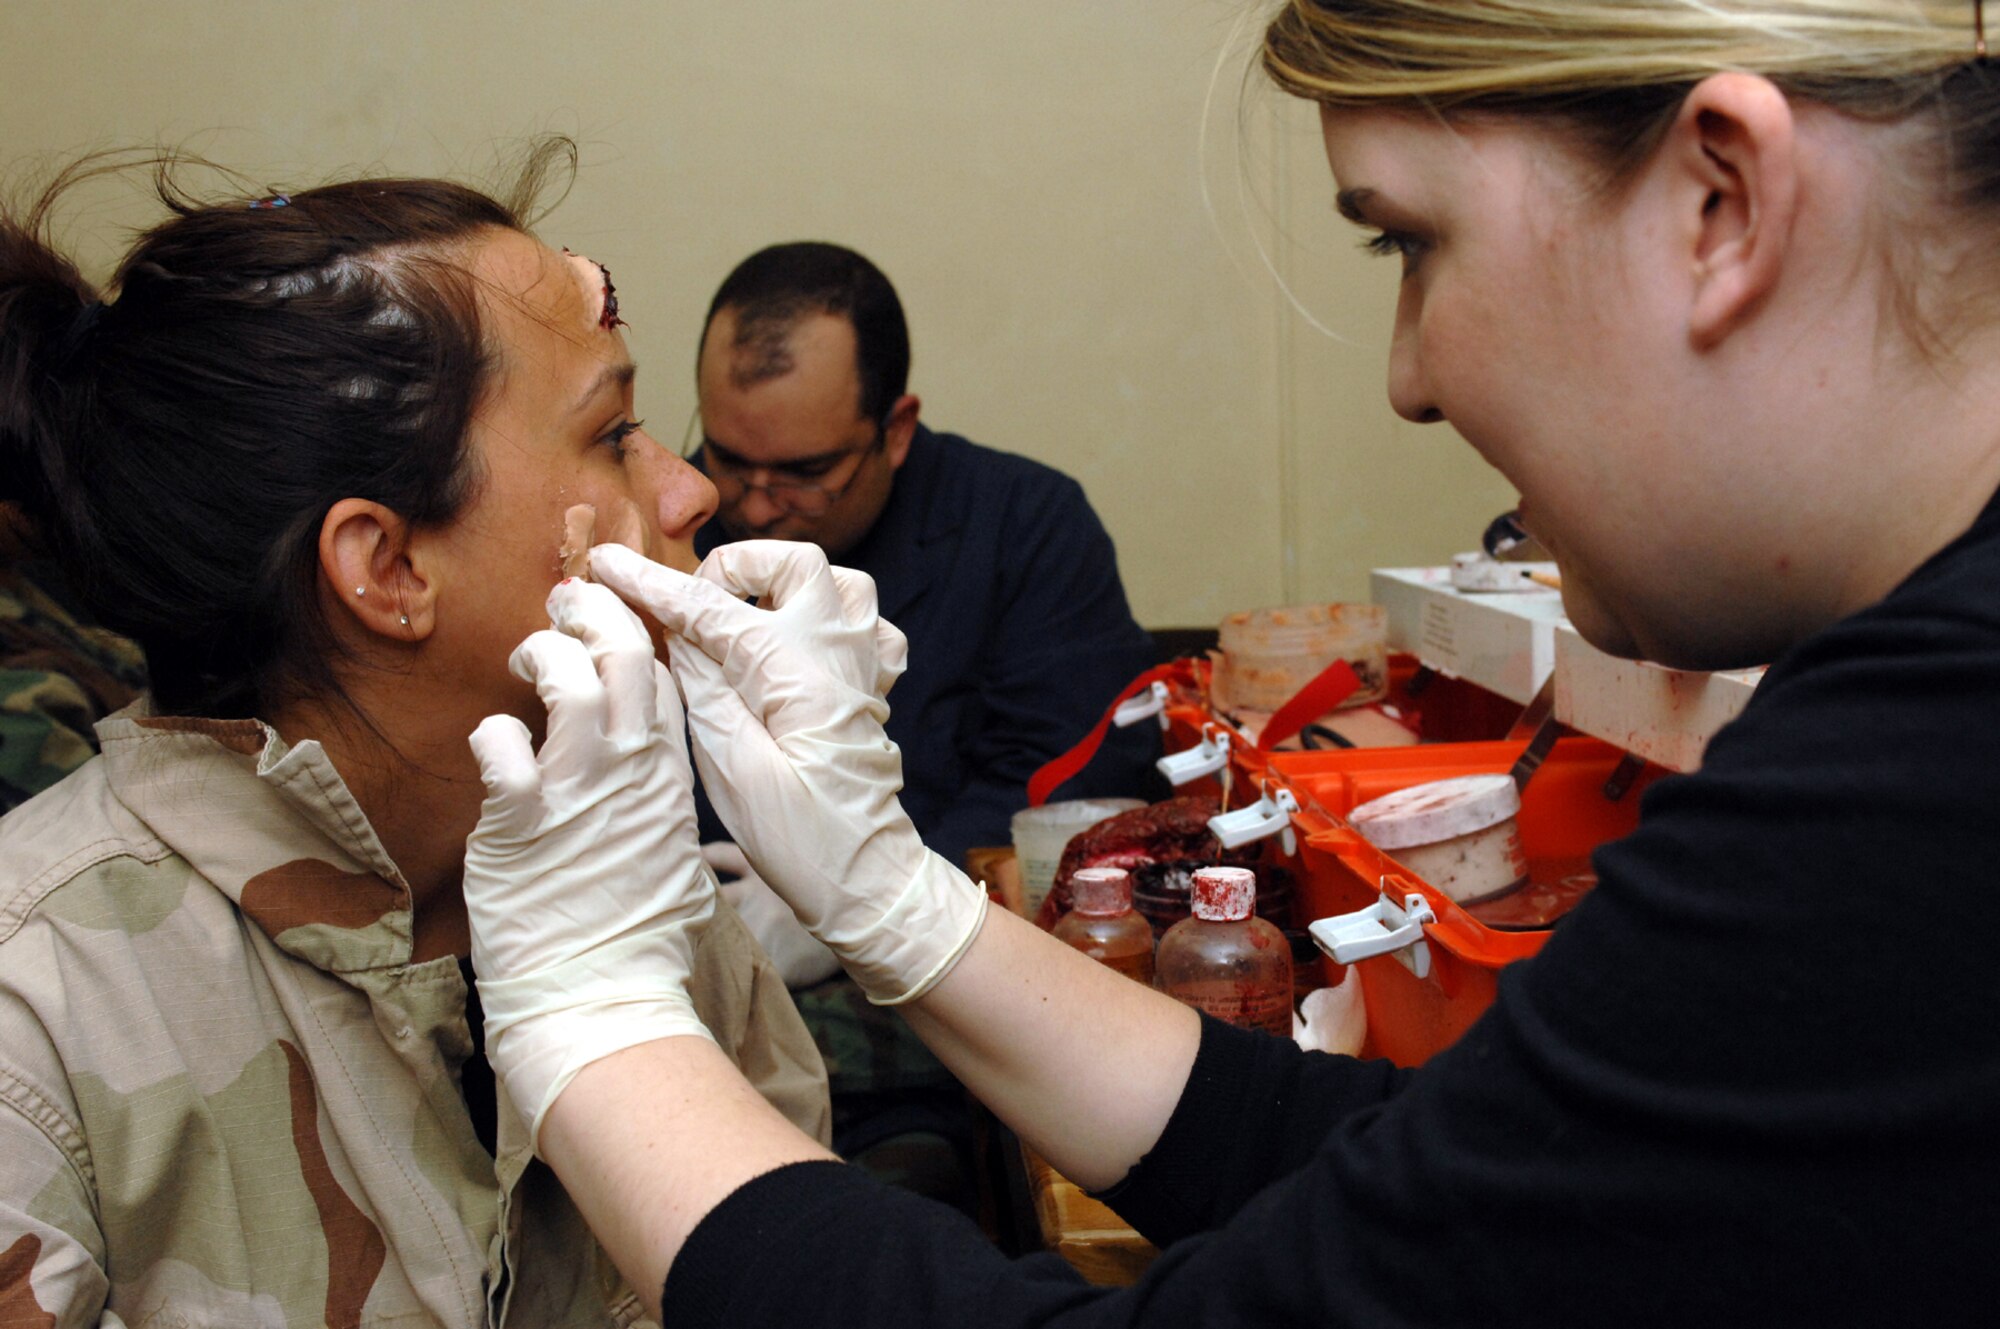 SPANGDAHLEM AIR BASE, Germany -- Megan Caberto, daughter of Col. Steven Caberto, 52nd Medical Group deputy commander, receives a facial laceration moulage from Senior Airman Bridget Borseth, 52nd Dental Squadron, during Exercise Saber Crown 08-06, April 22, 2008. (U.S. Air Force photo/Staff Sgt. Kristin Ruleau) 